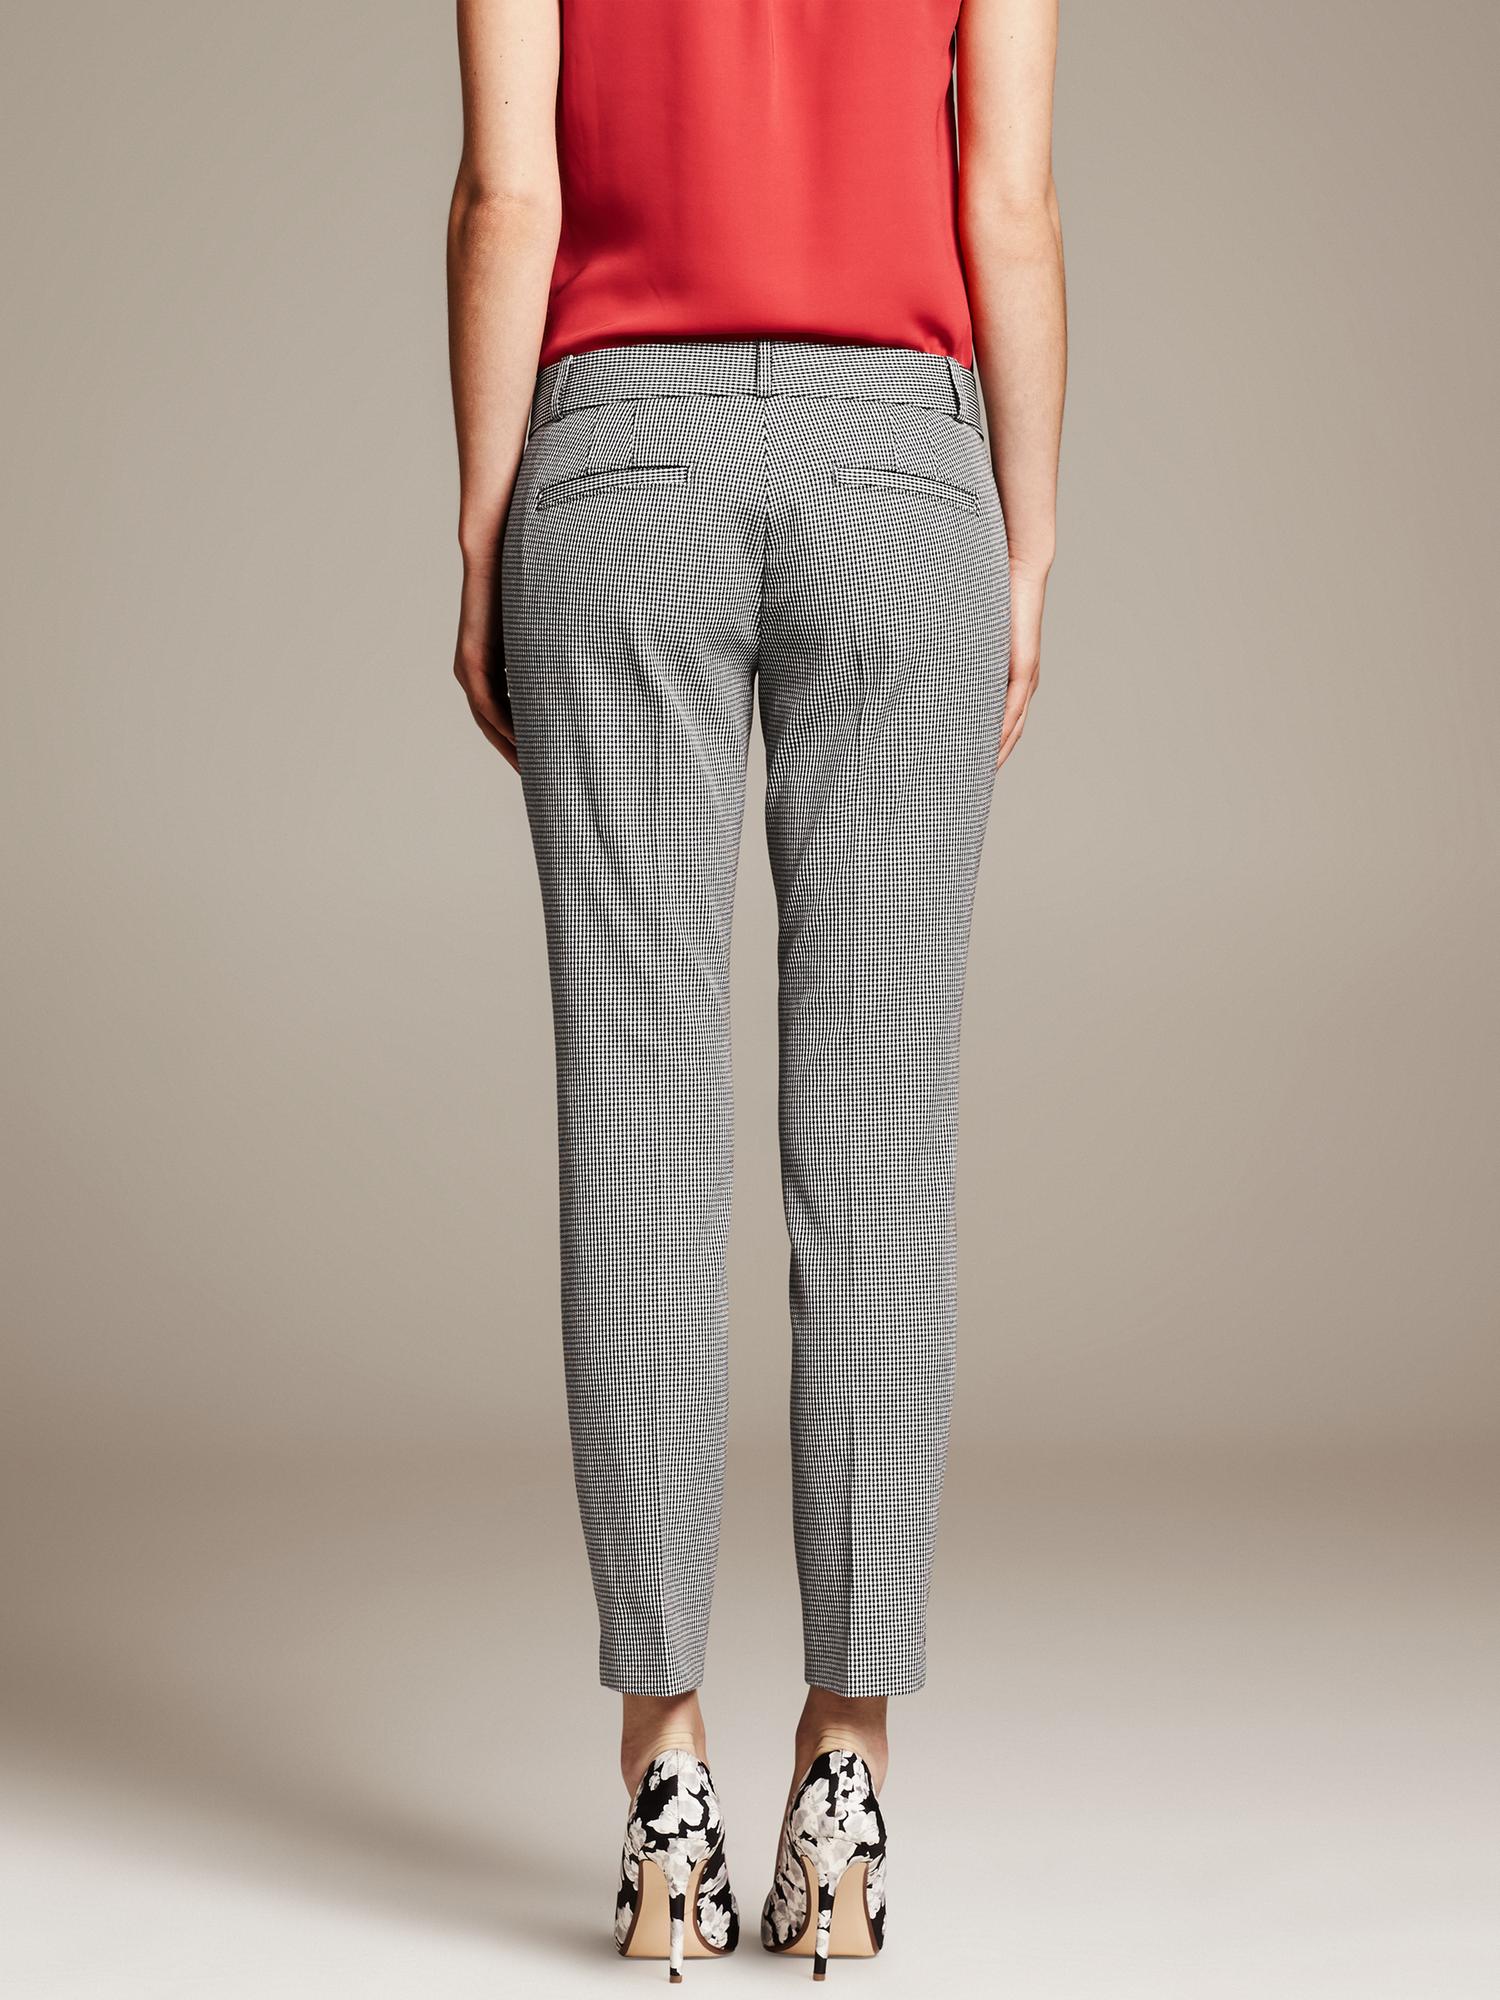 Sloan-Fit Houndstooth Slim Ankle Pant, Banana Republic